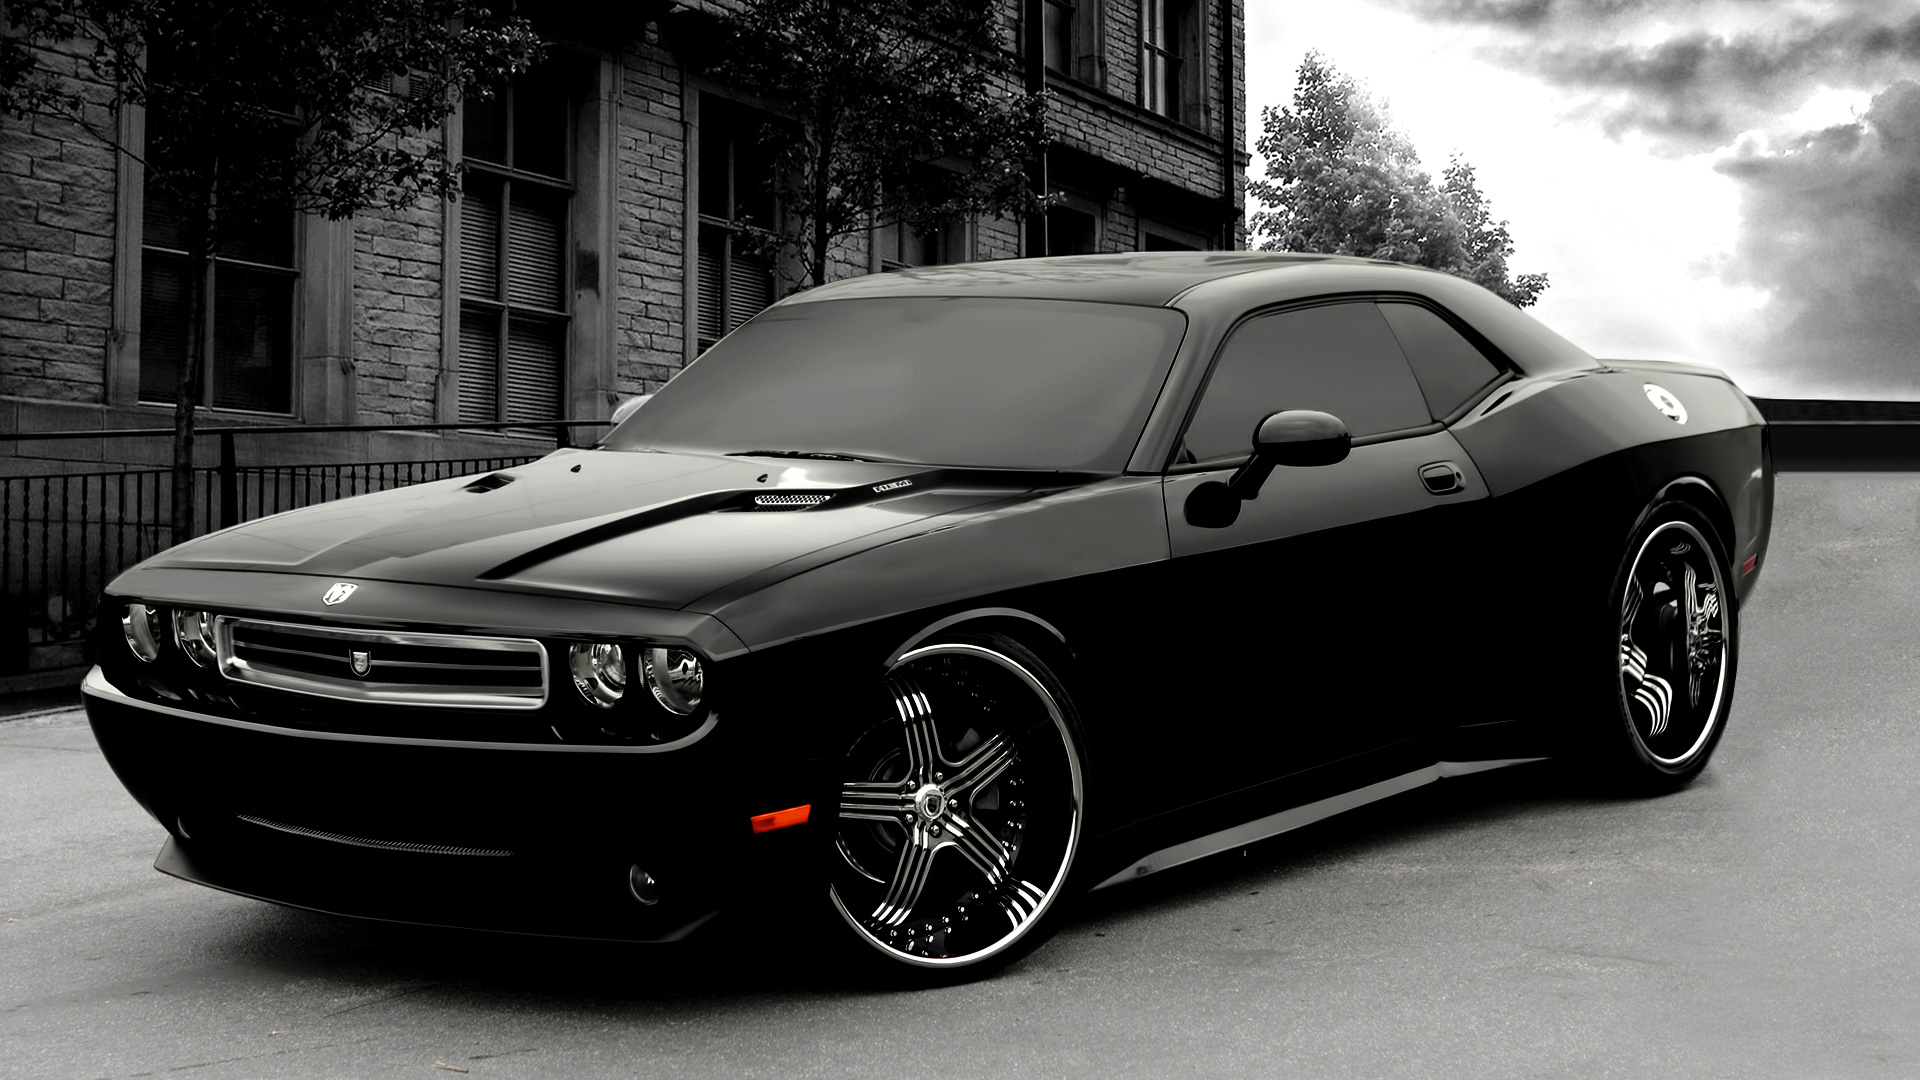 You Can Black Dodge Challenger HD Wallpaper In Your Puter